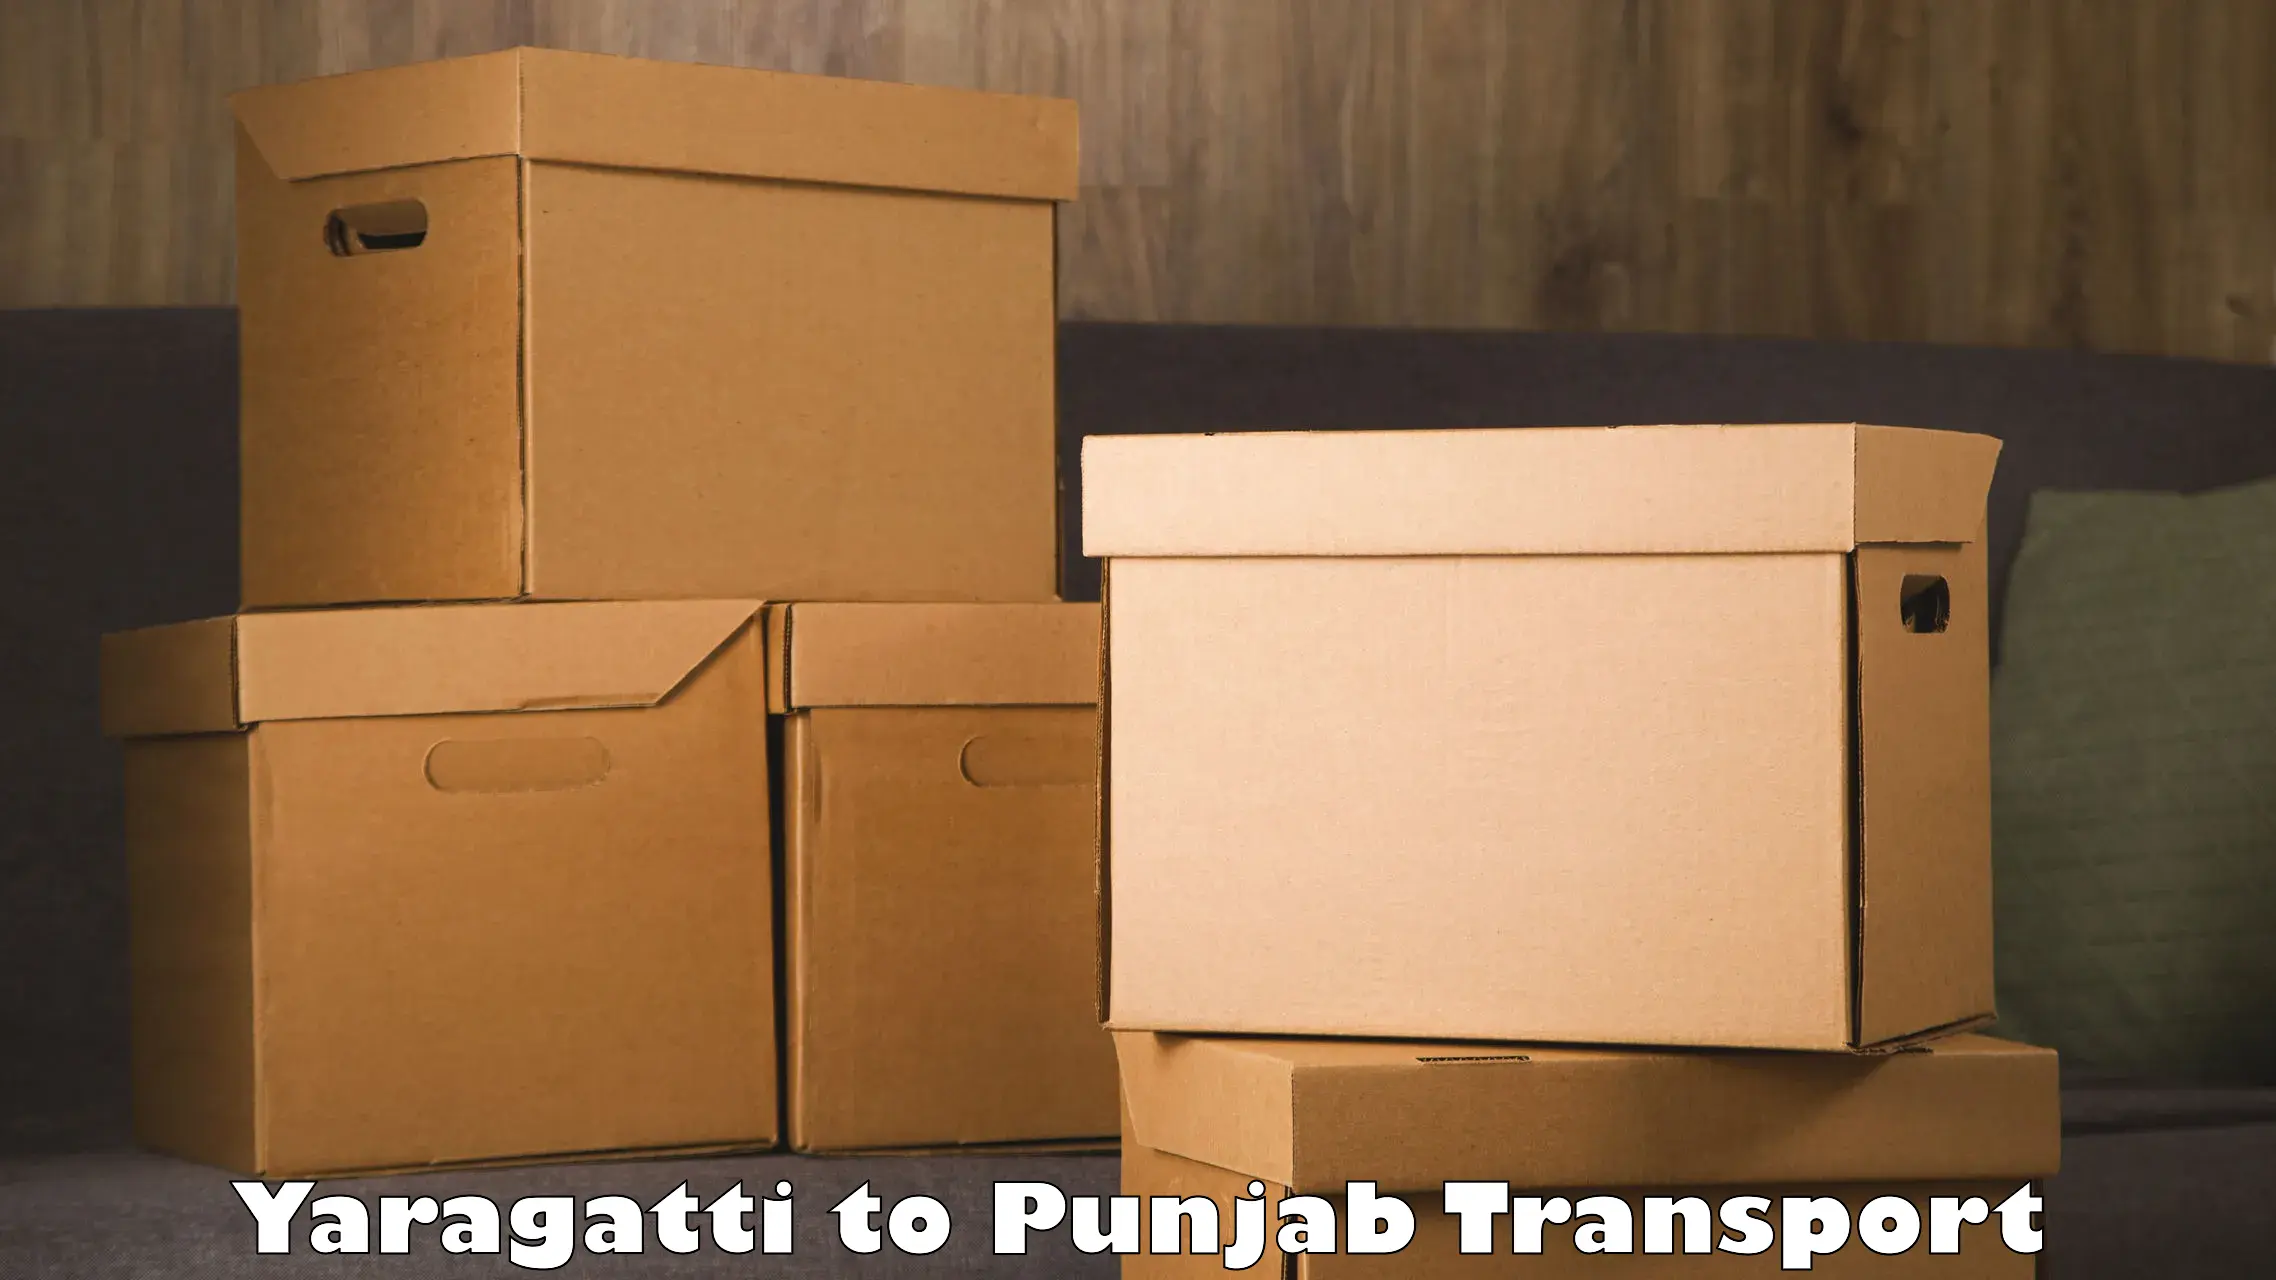 Transport bike from one state to another Yaragatti to Pathankot